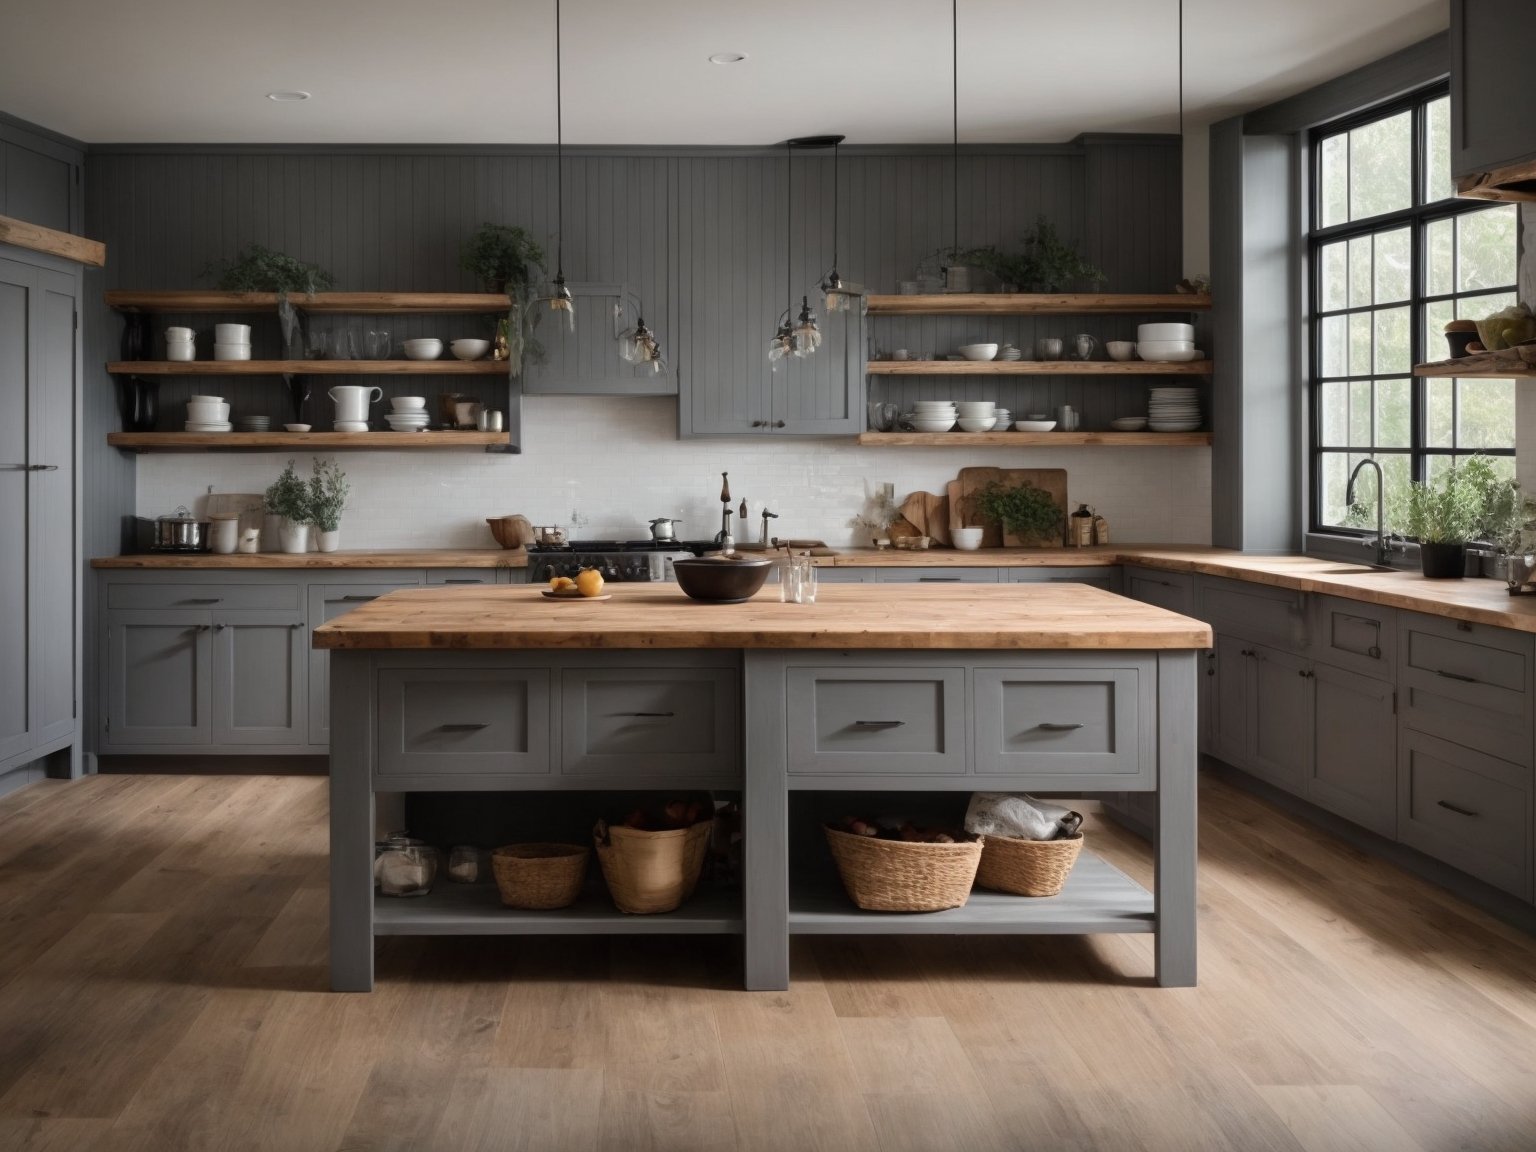 A beautiful farmhouse kitchen featuring grey cabinets and butcher block countertops, creating a timeless and inviting atmosphere.